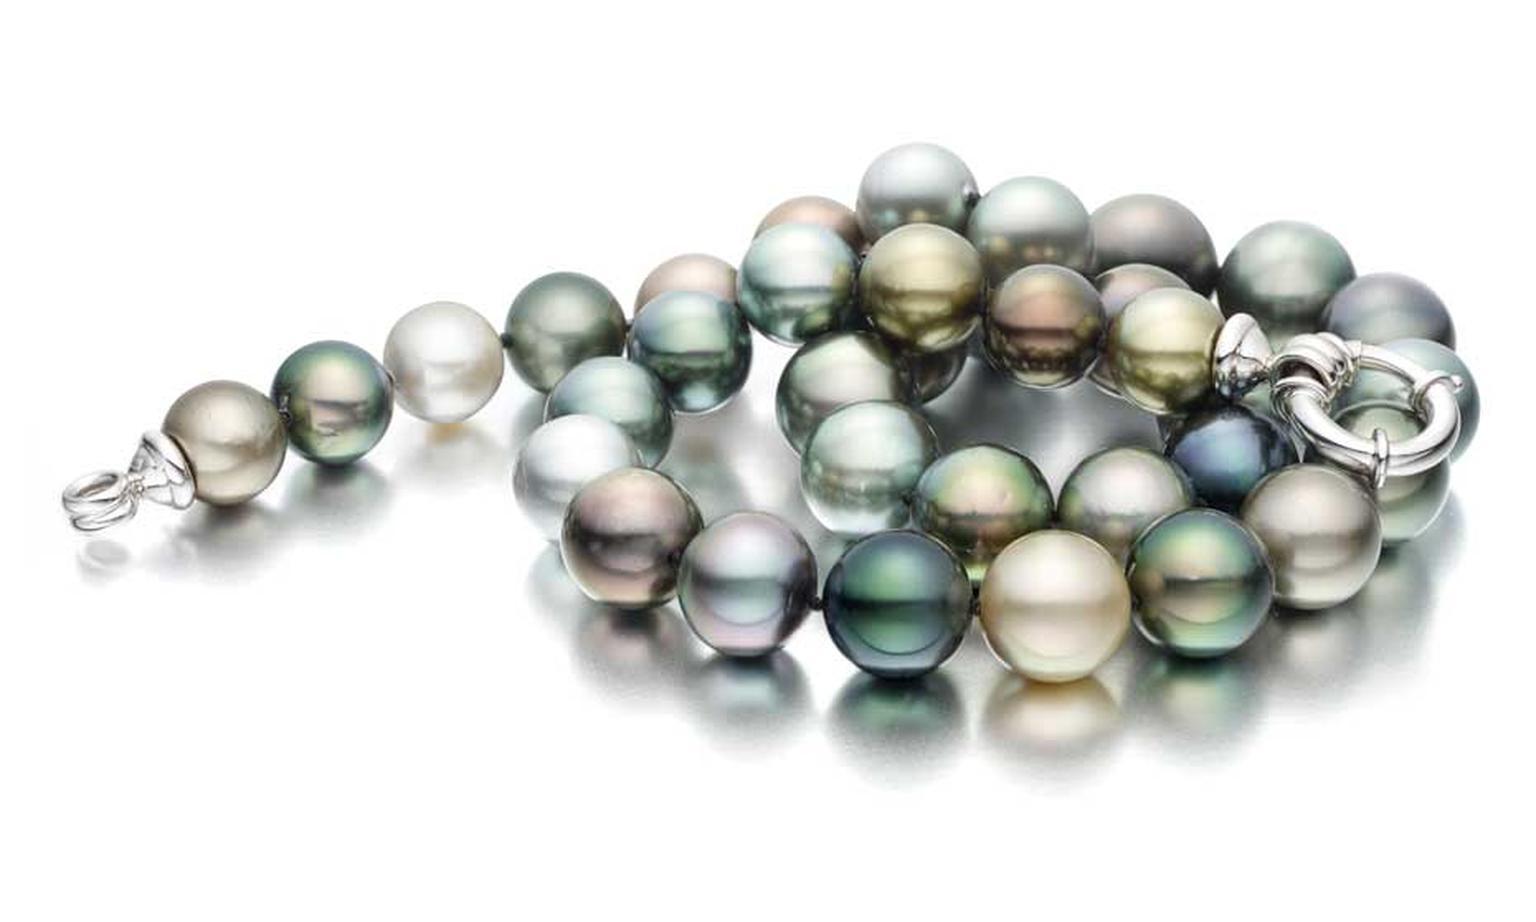 Winterson multi-coloured Tahitian Pearl necklace with white gold clasp and 10.8mm-14mm pearls.